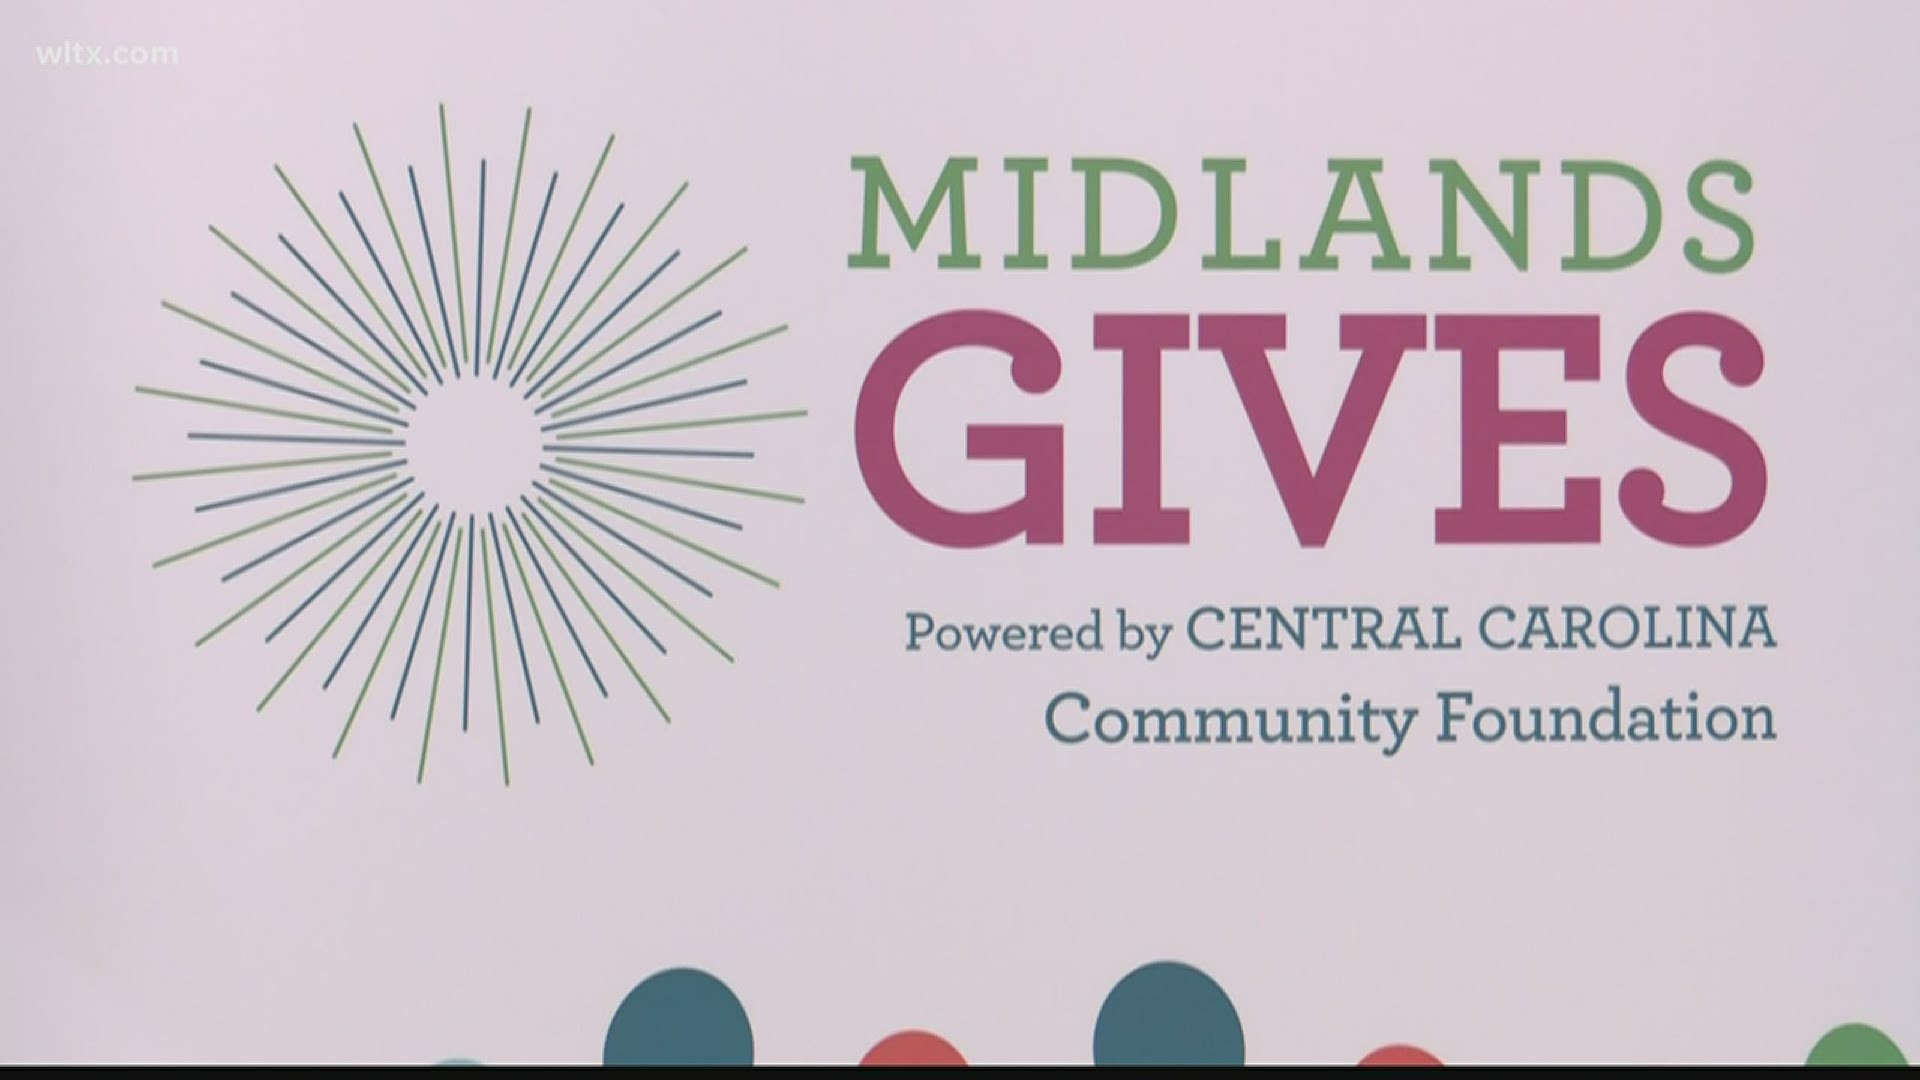 The Central Carolina Community Foundation (CCCF) is once again hosting the 18-hour online giving challenge to raise money for 415 non-profits.